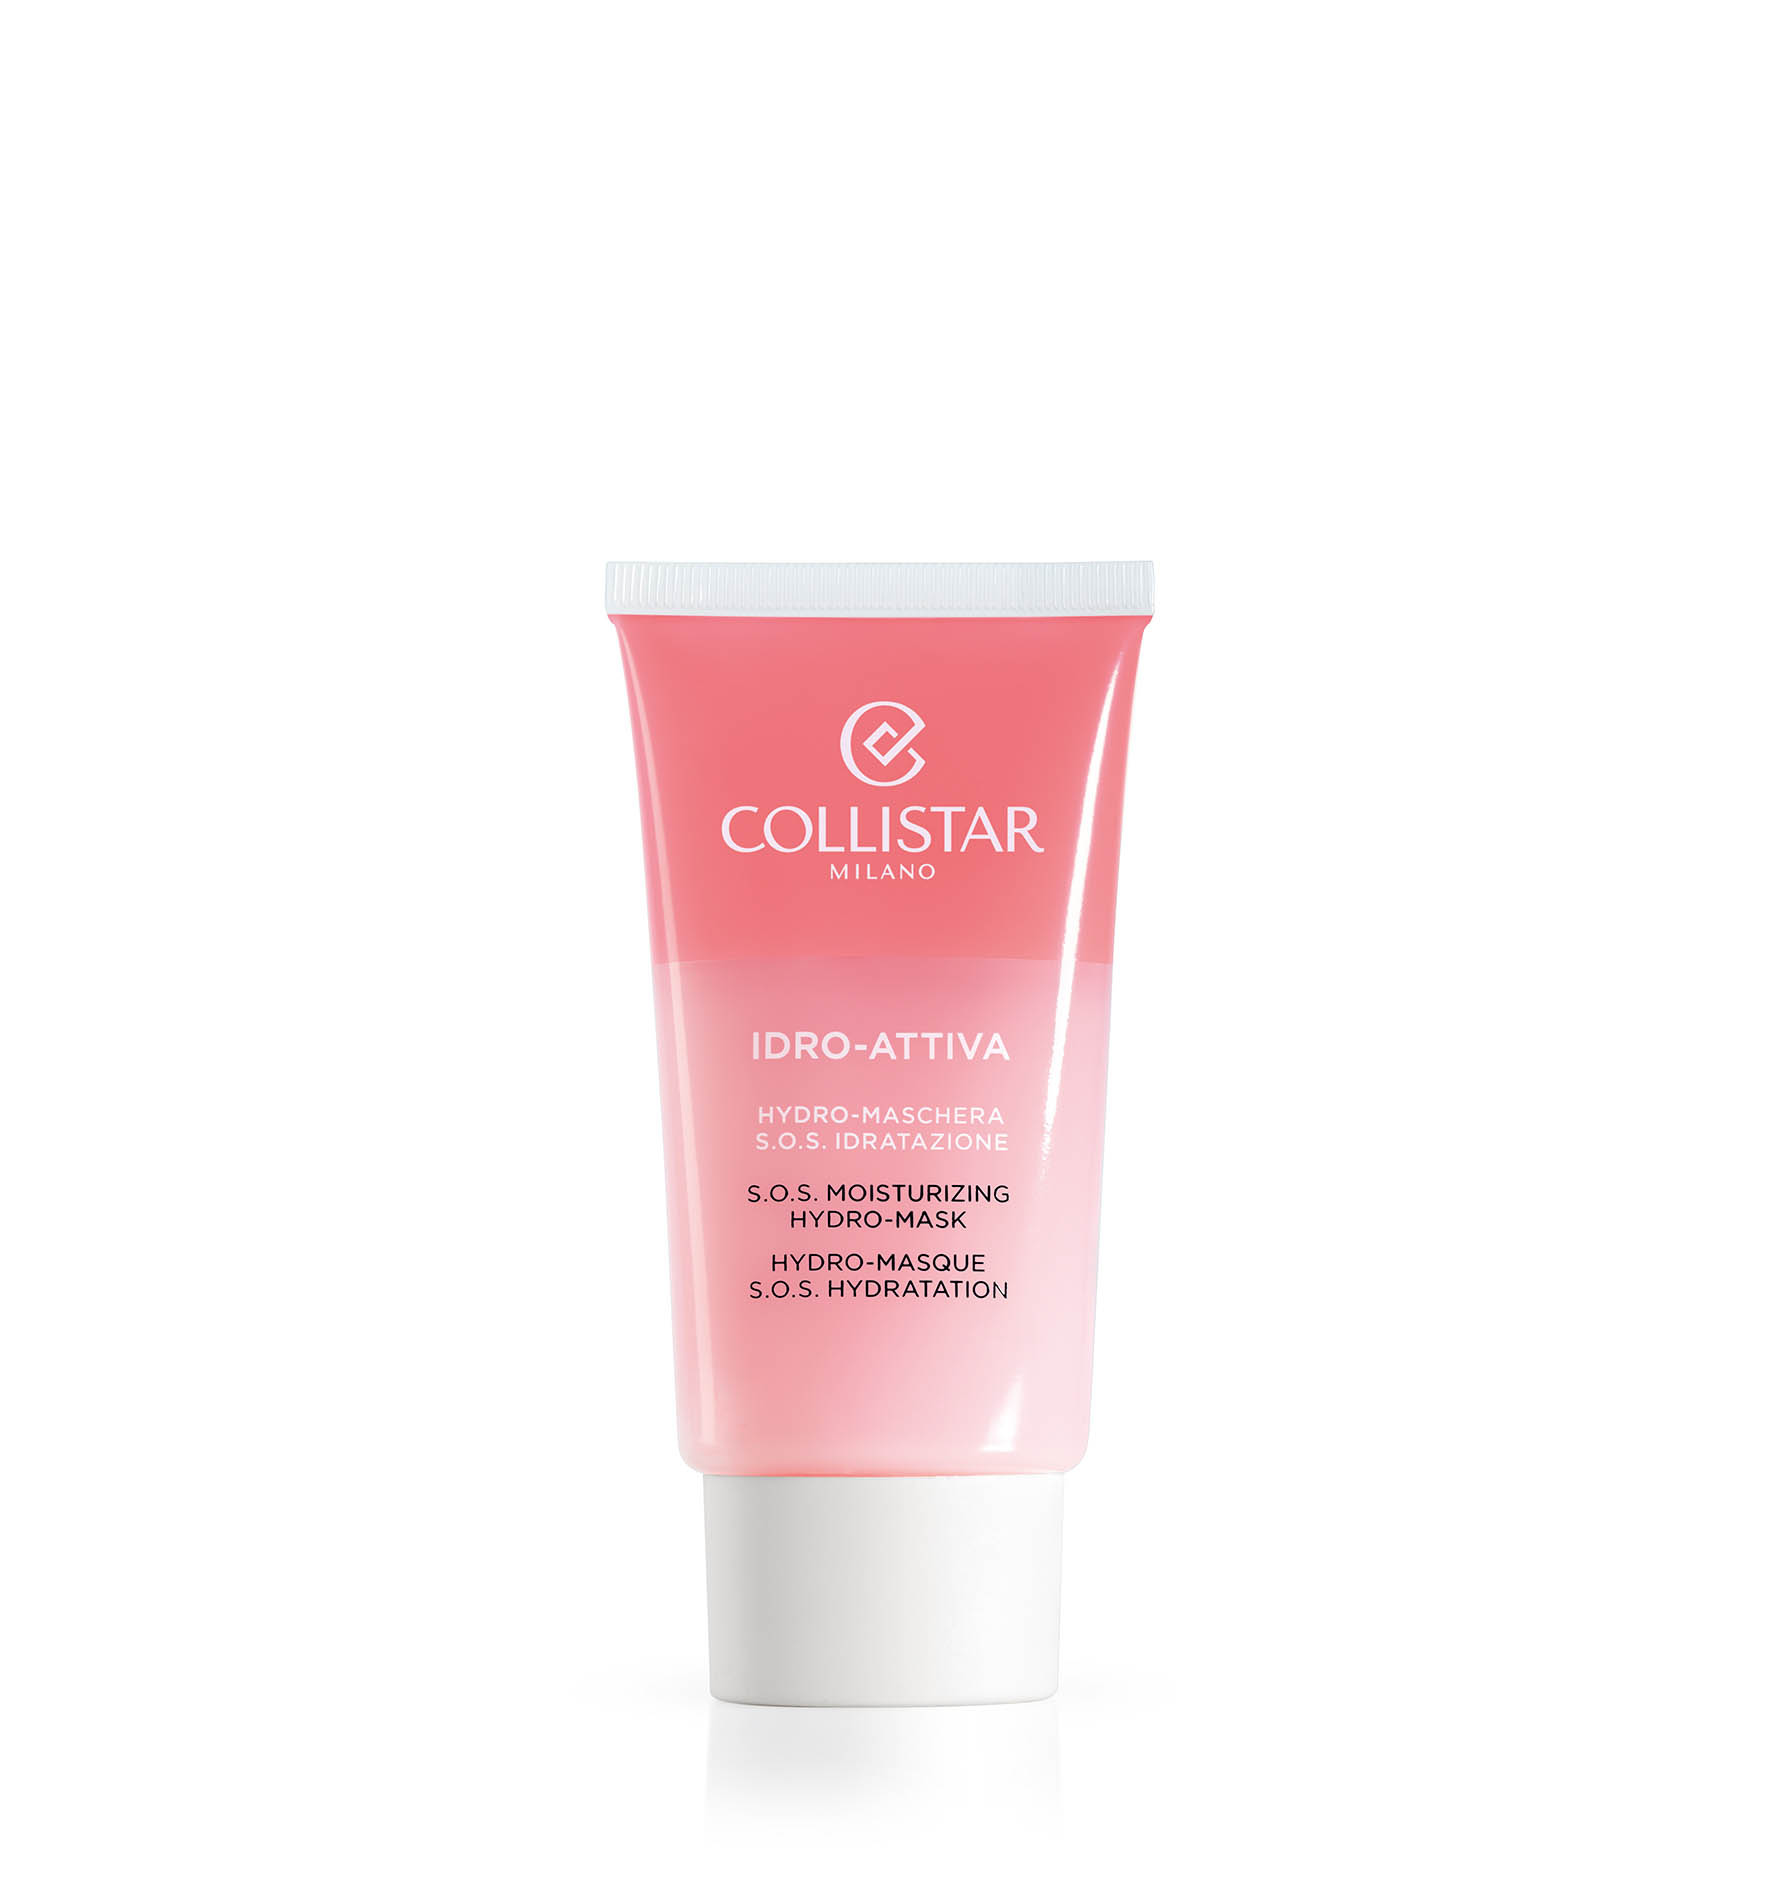 S.O.S MOISTURIZING HYDRO-MASK - For her | Collistar - Shop Online Ufficiale